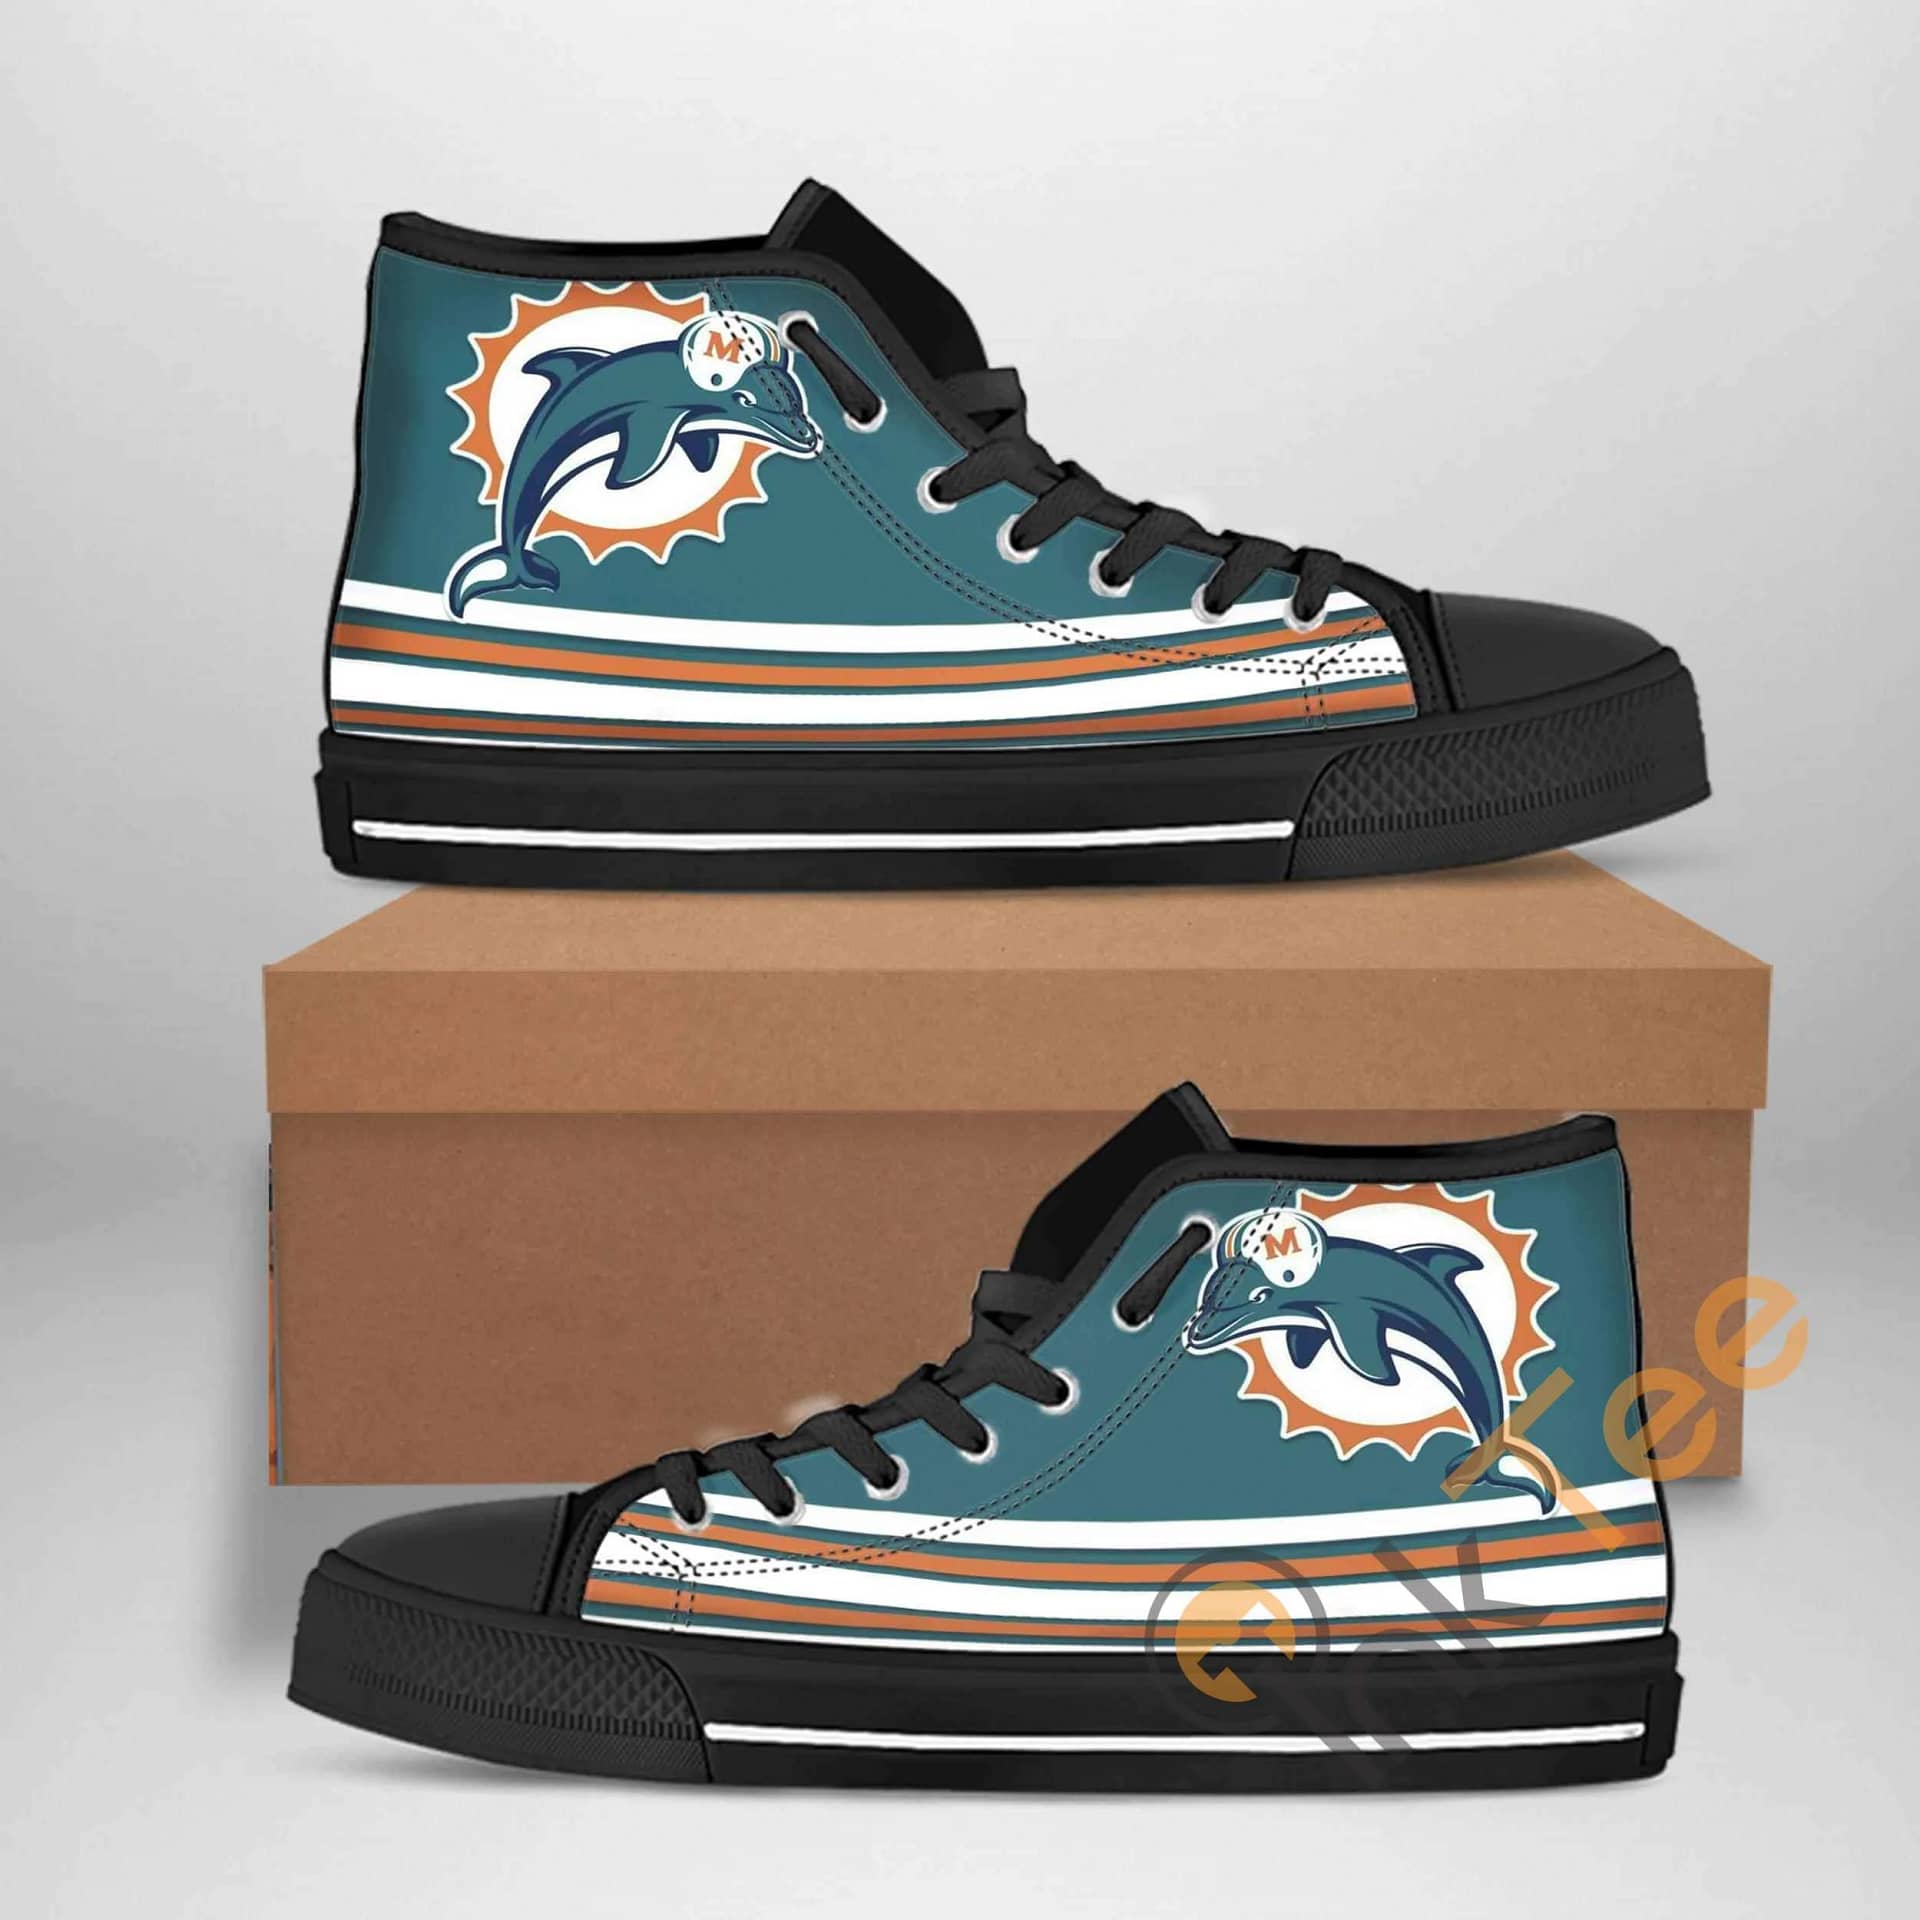 Miami Dolphins Nfl Football Amazon Best Seller Sku 1919 High Top Shoes